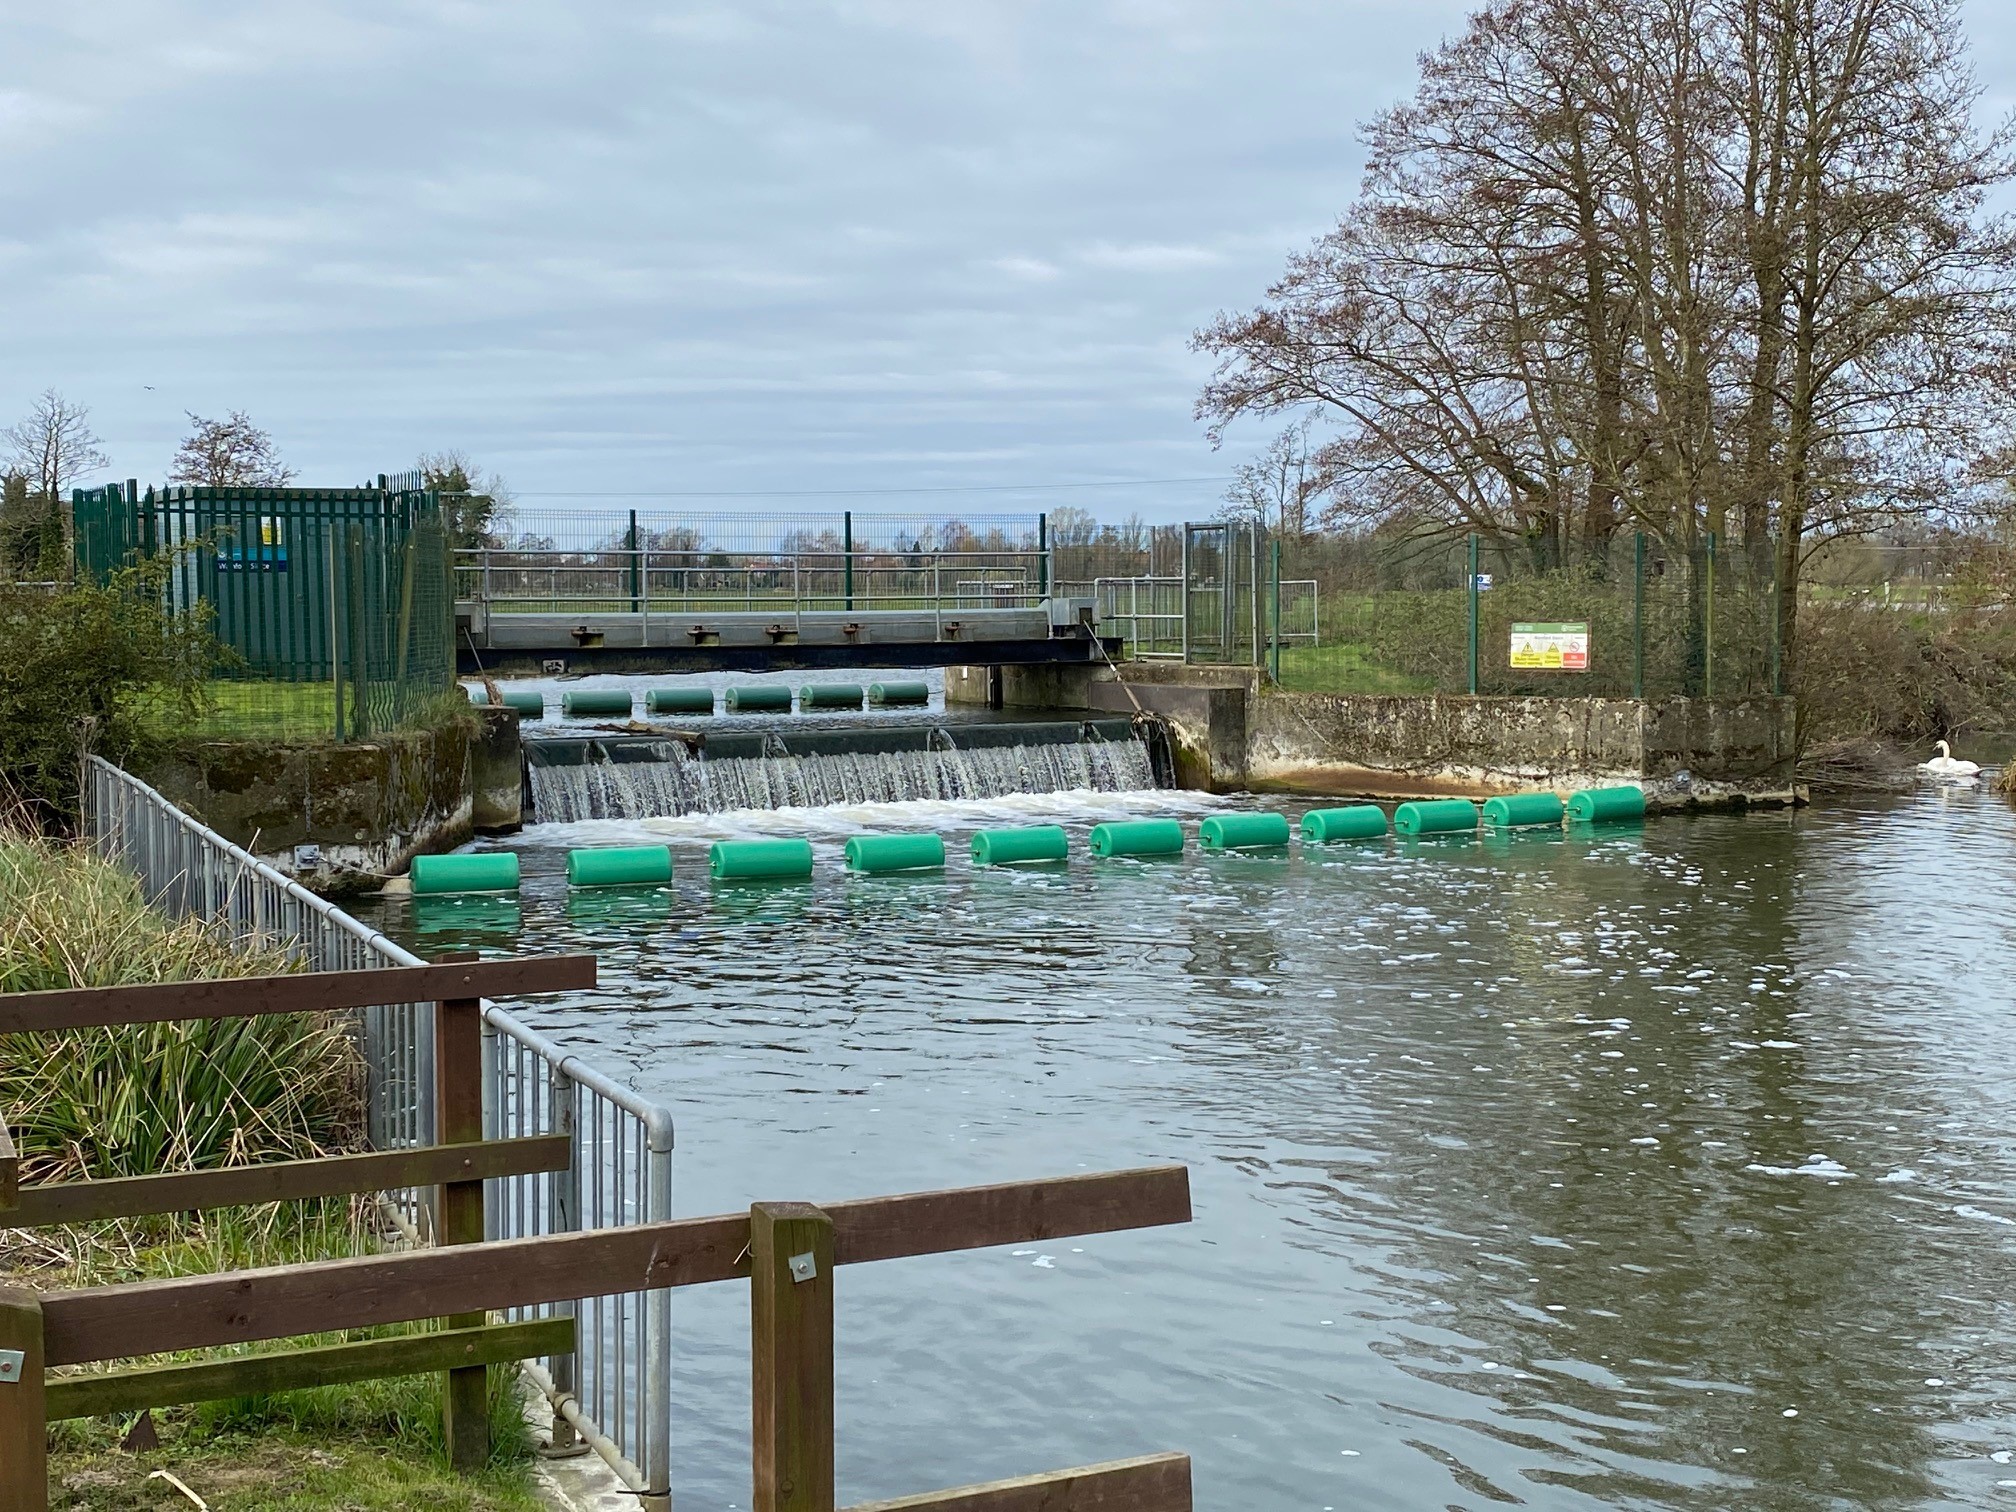 UK's Environment Agency appoints Bolina to install floating booms at Wainford Sluice